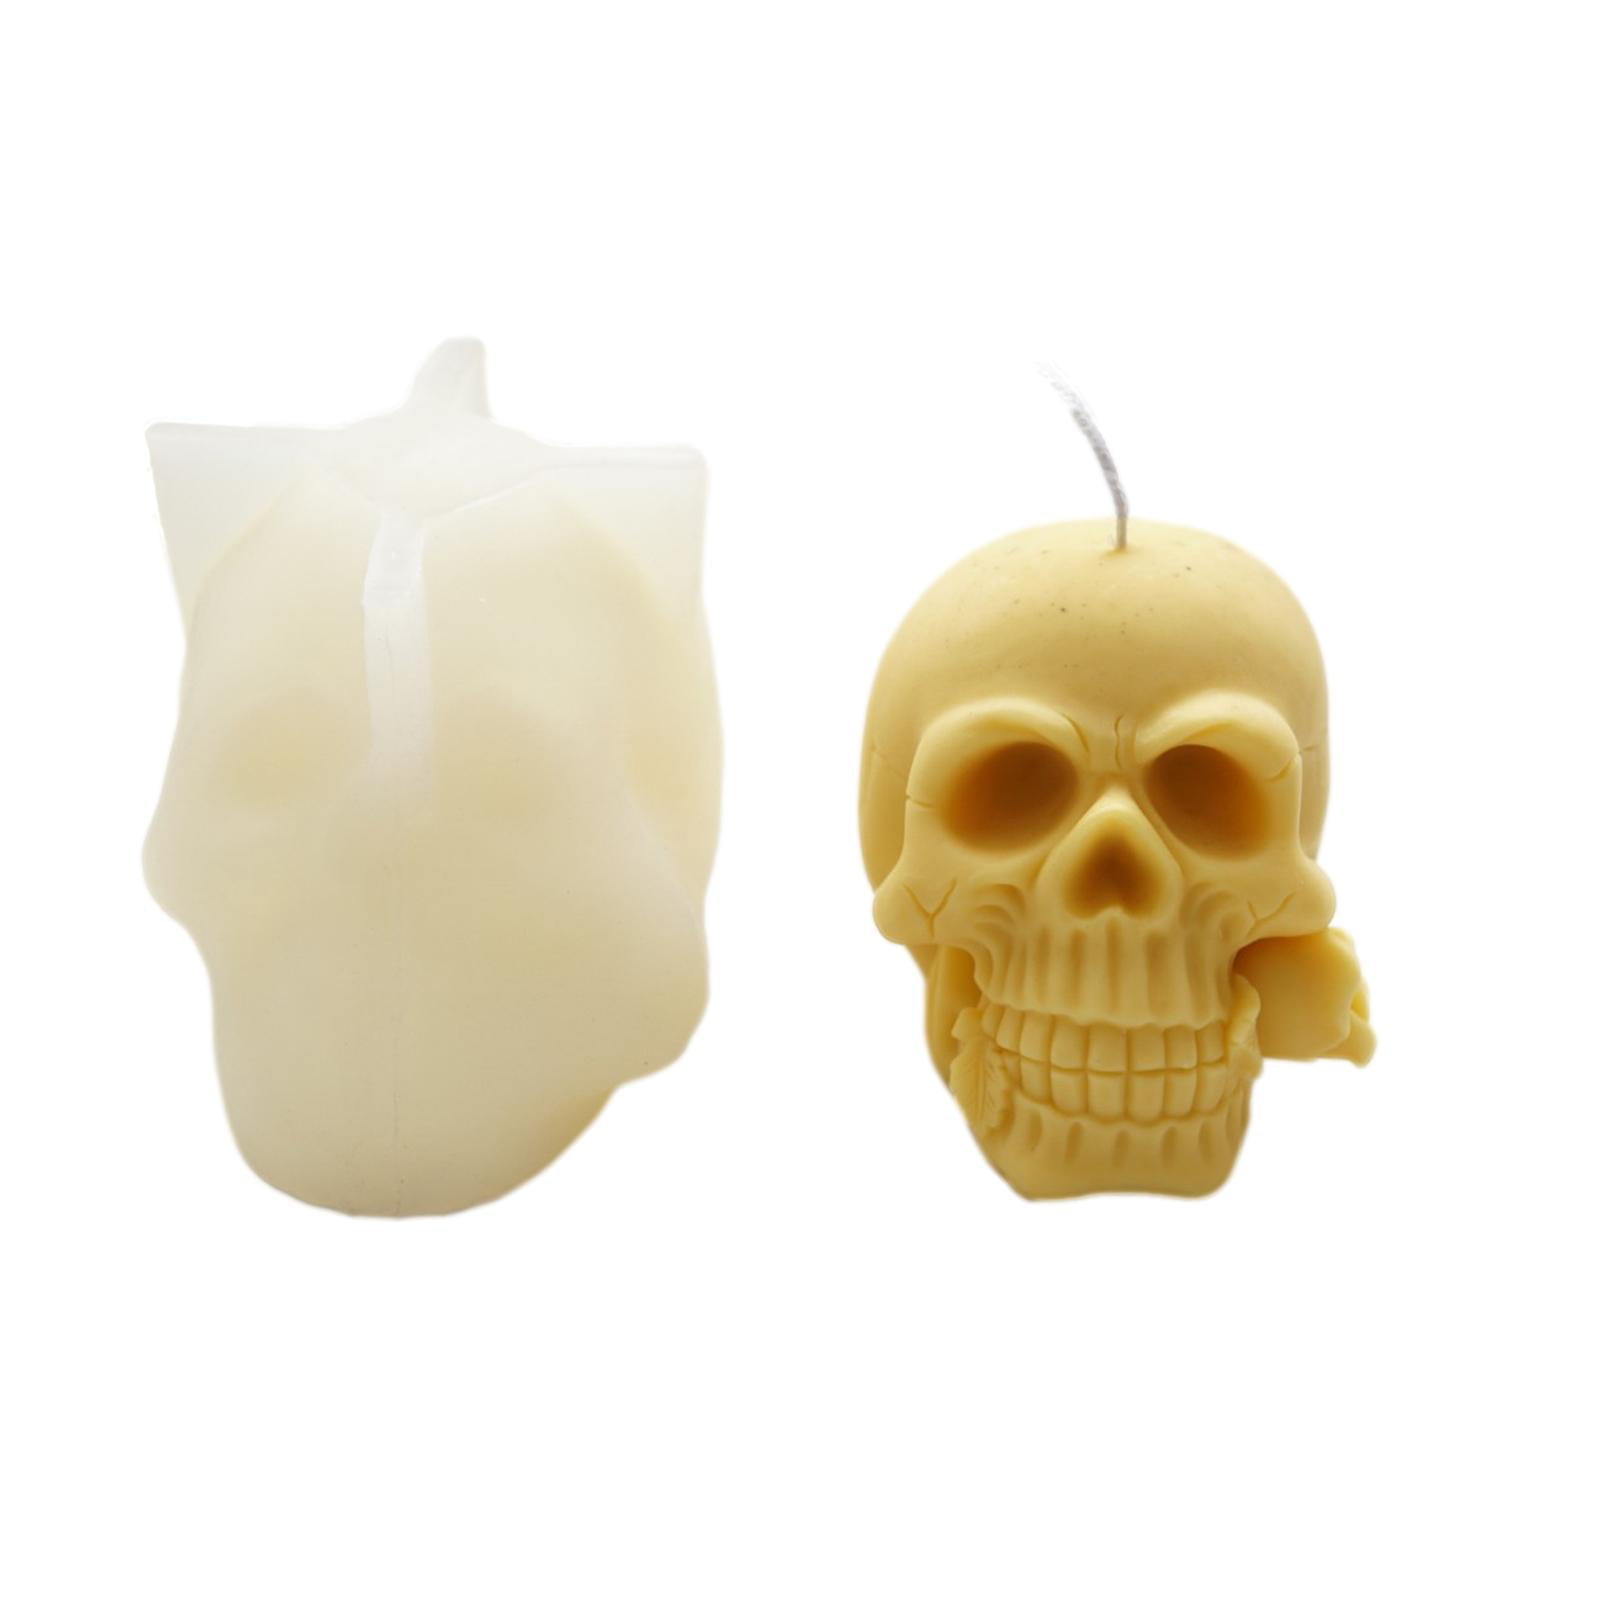 Diy Relief Skull Silicone Mold Candle Resin Model Making Candle Crafts Mould 